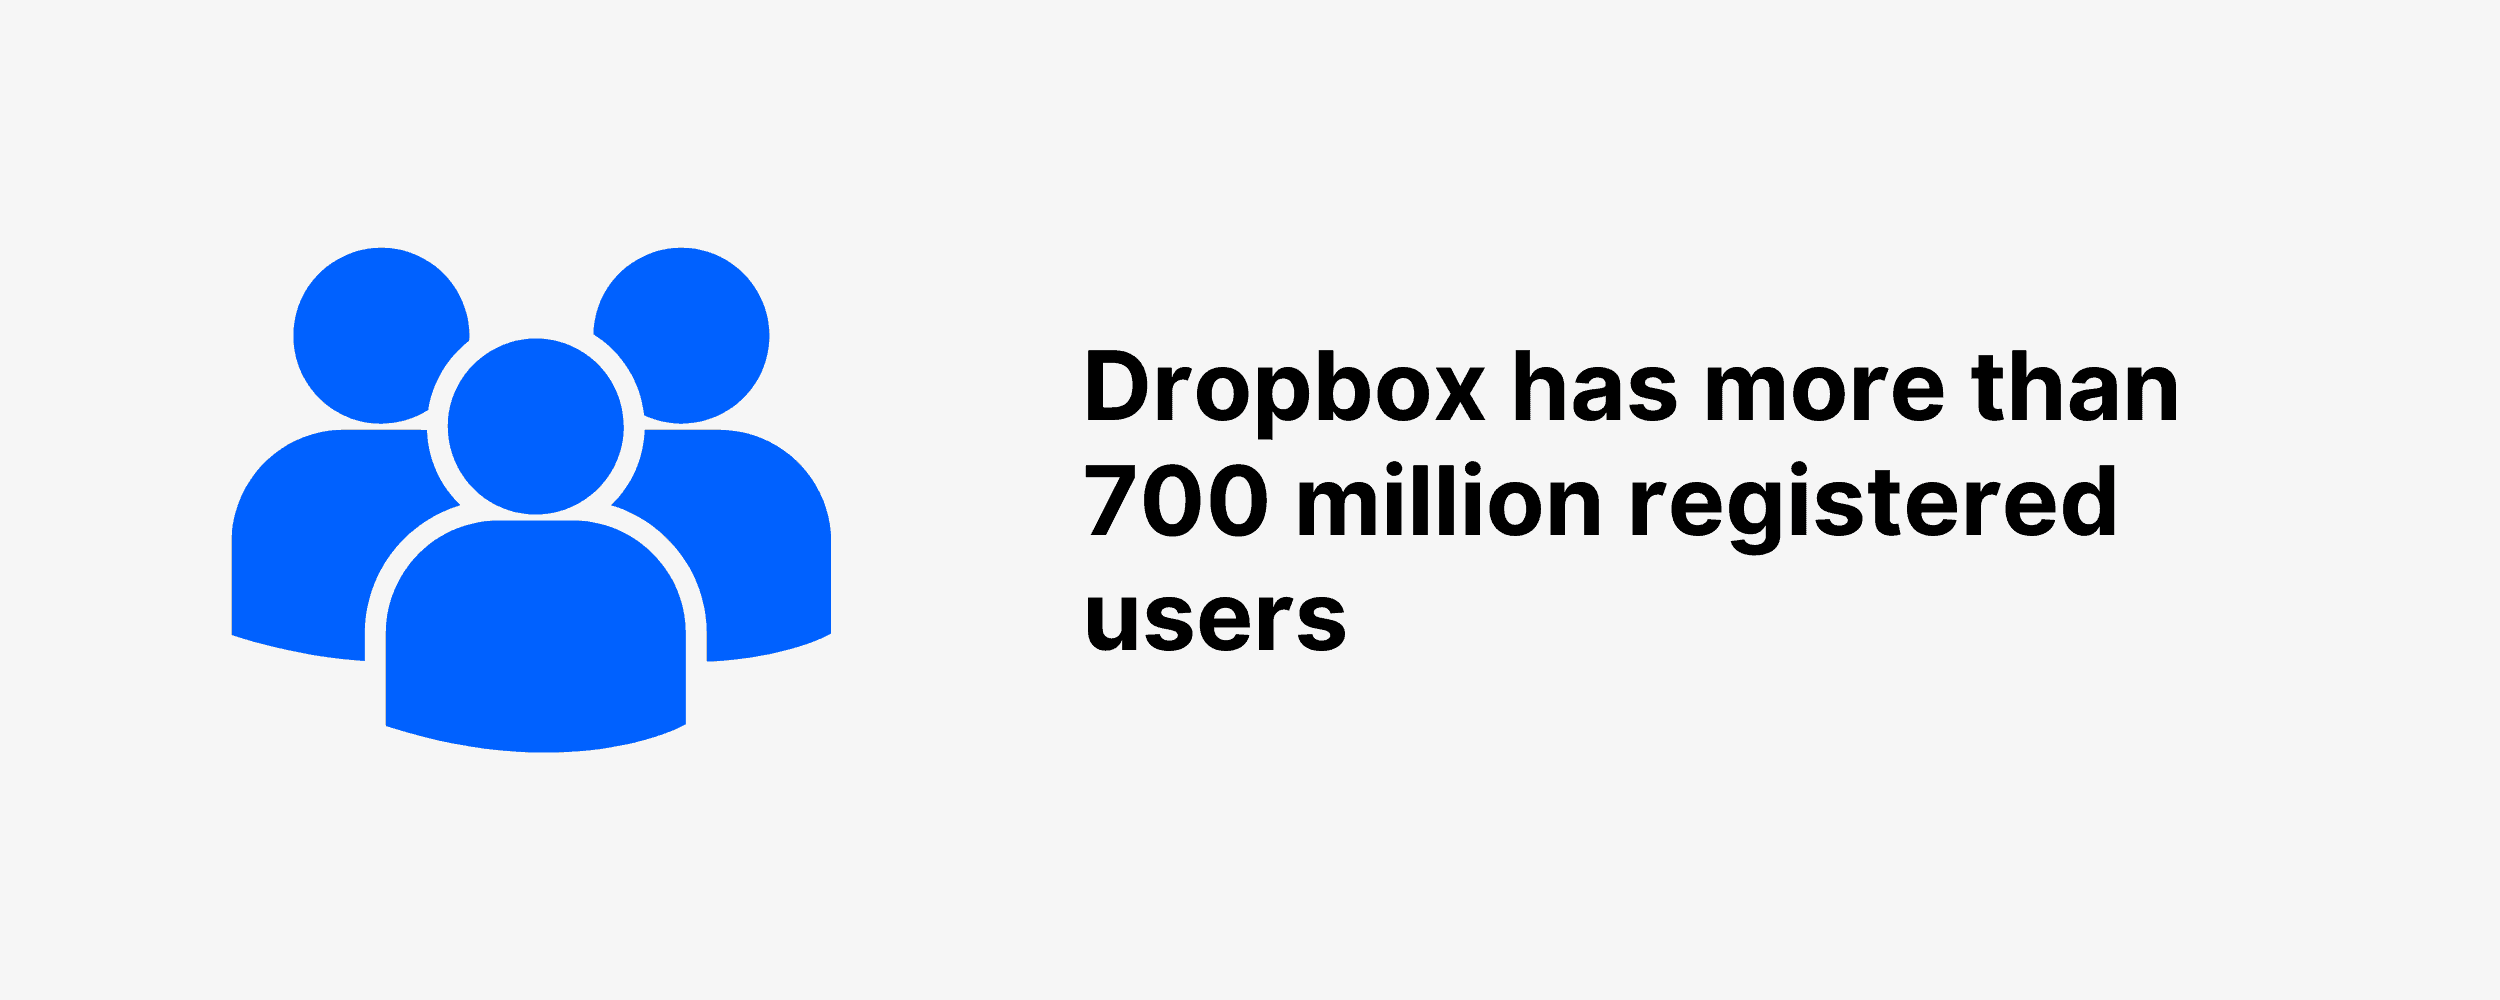 Dropbox has more than 700 million registered users